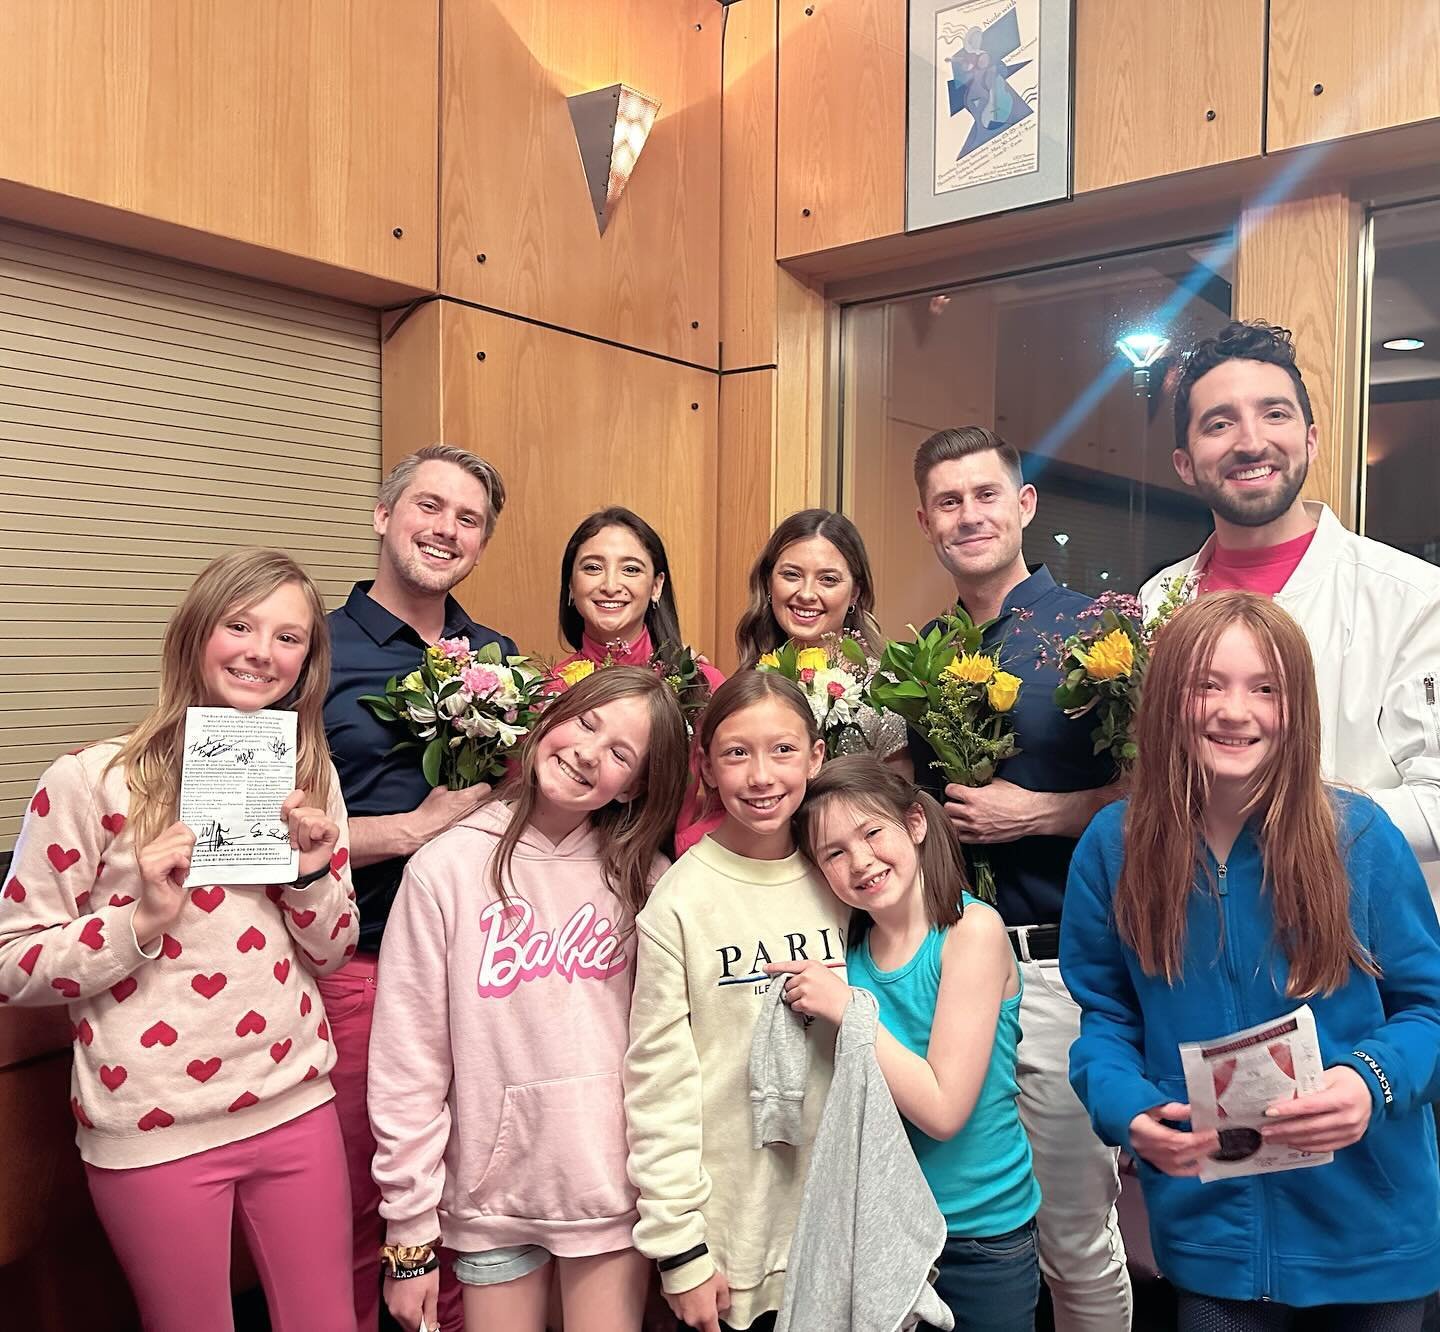 Nothing but smiles last night with the @backtrackvocals singers at their performance. Thank you @tahoeartsproject for hosting such an amazing event for our community!! Flowers for the generous performers donated by @wholefoods and arranged by @petalk